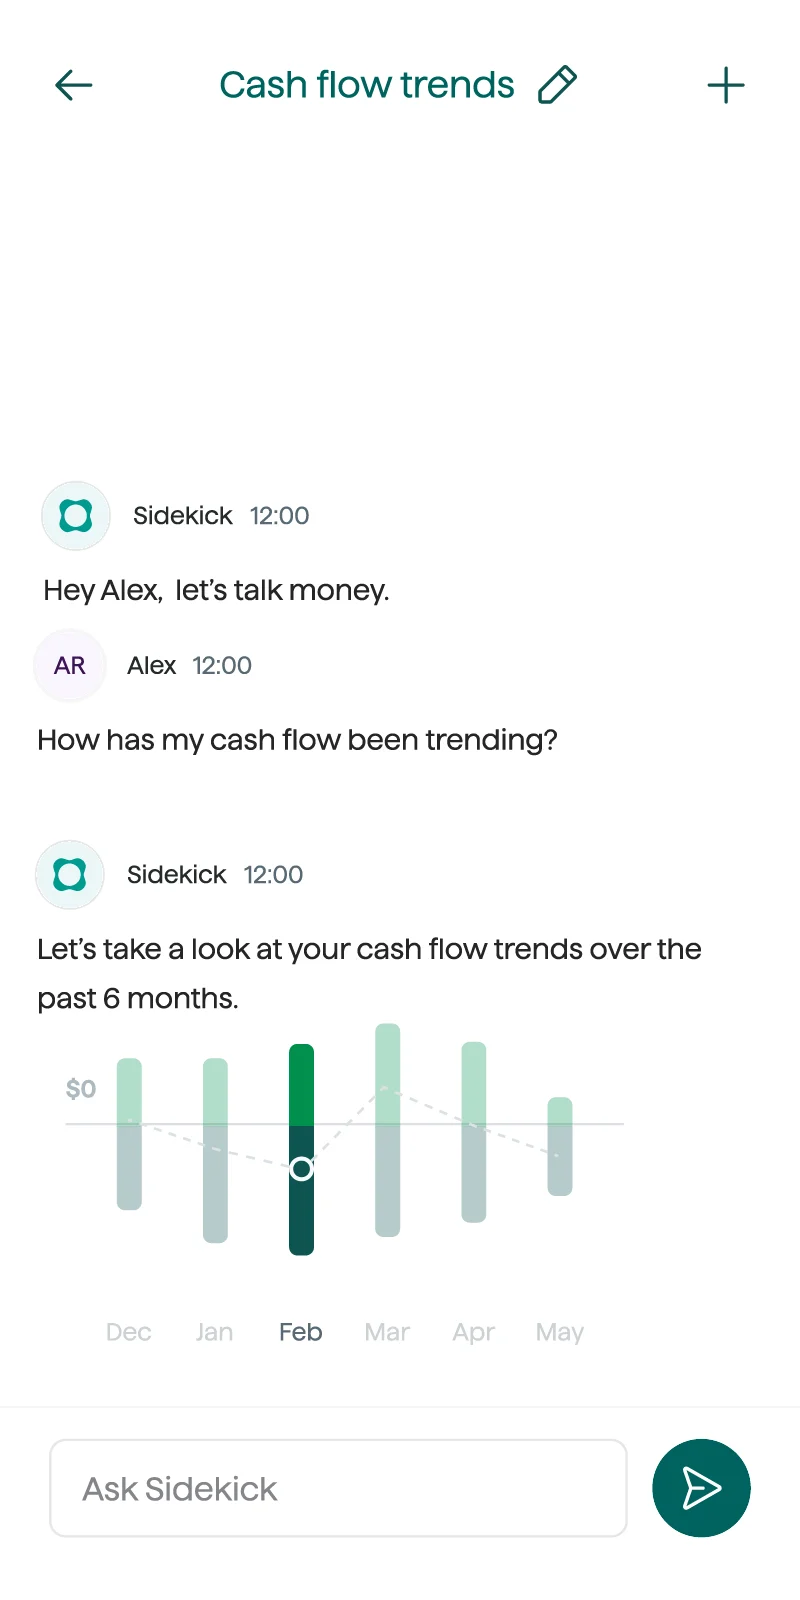 Origin app conversation with sidekick titled 'Cash flow trends'. 'Sidekick' prompts with 'Hey Alex, let’s talk money' and 'Let’s take a look at your cash flow trends over the past 6 months.' Alex responds with 'How has my cash flow been trending?' Below the conversation, a bar graph displays cash flow for December through May, with a dashed line indicating the trend.